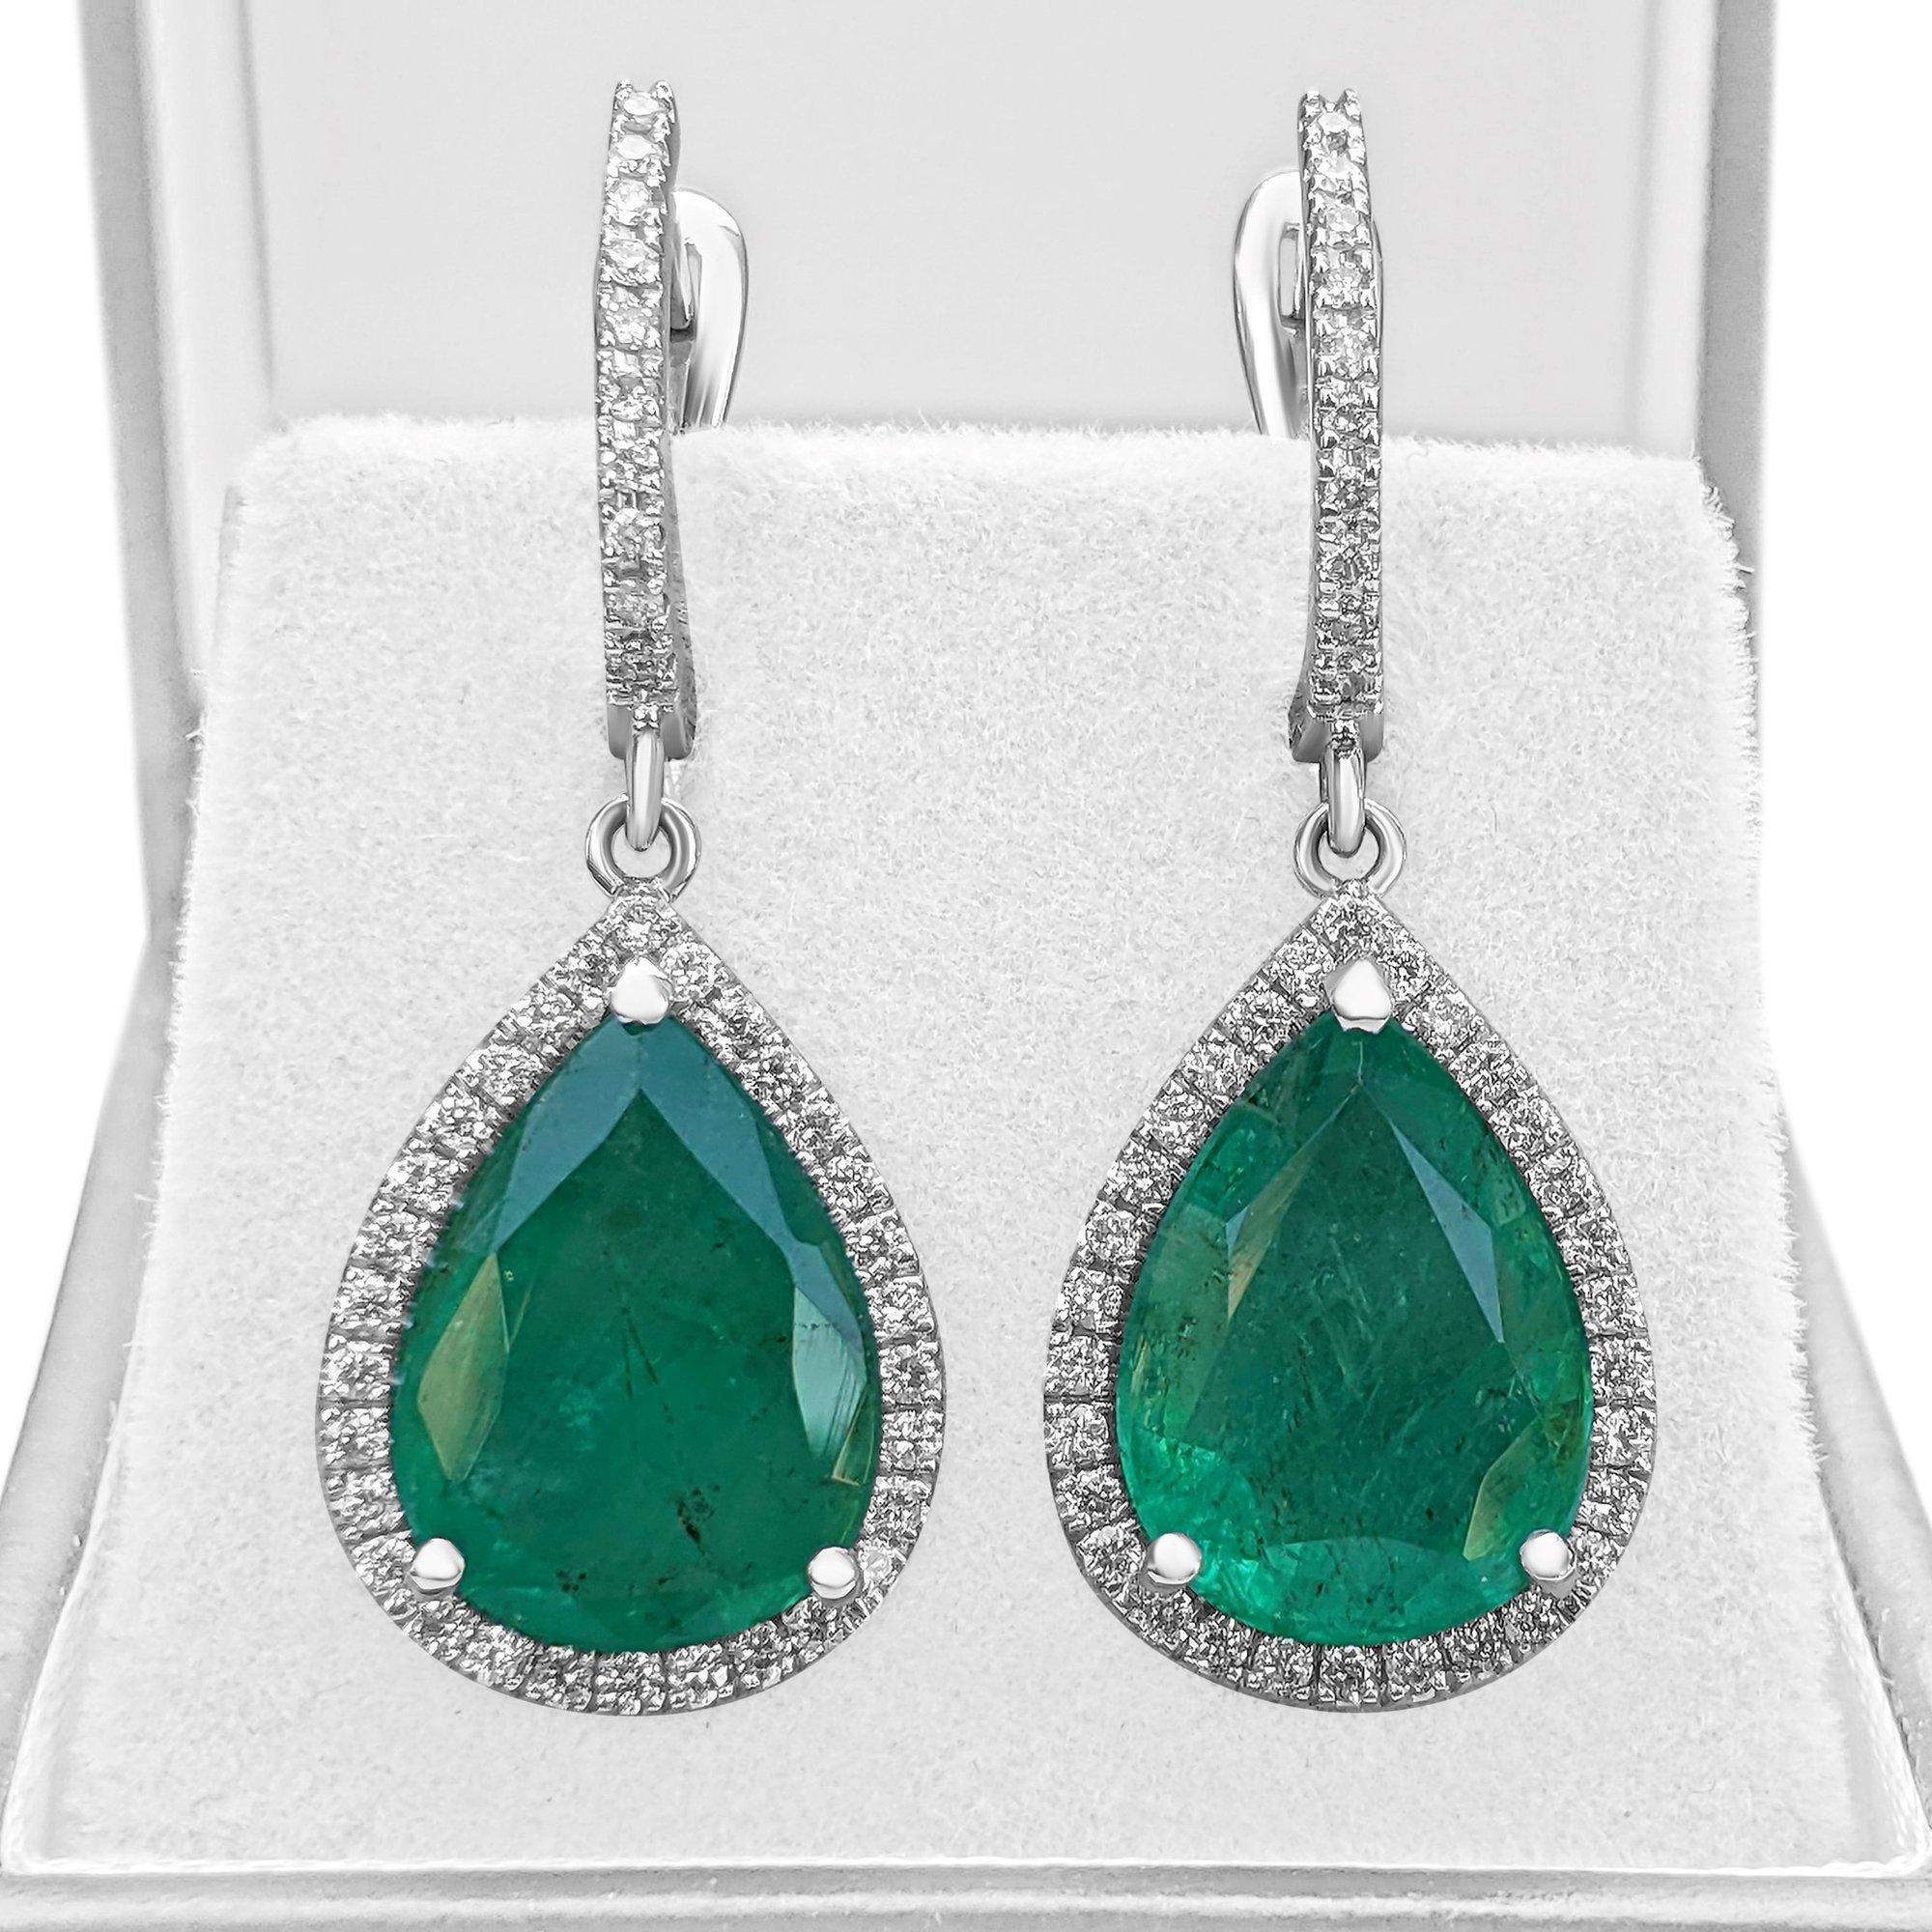 Excellent Quality Natural oval shaped emerald and diamond earrings with green color and excellent luster, adorned by high quality natural diamonds. 

Center Stone:
___________
Natural Emerald
Cut: Pear Mixed Cut
Carat: 9.57 tcw / 2 pieces
Color: